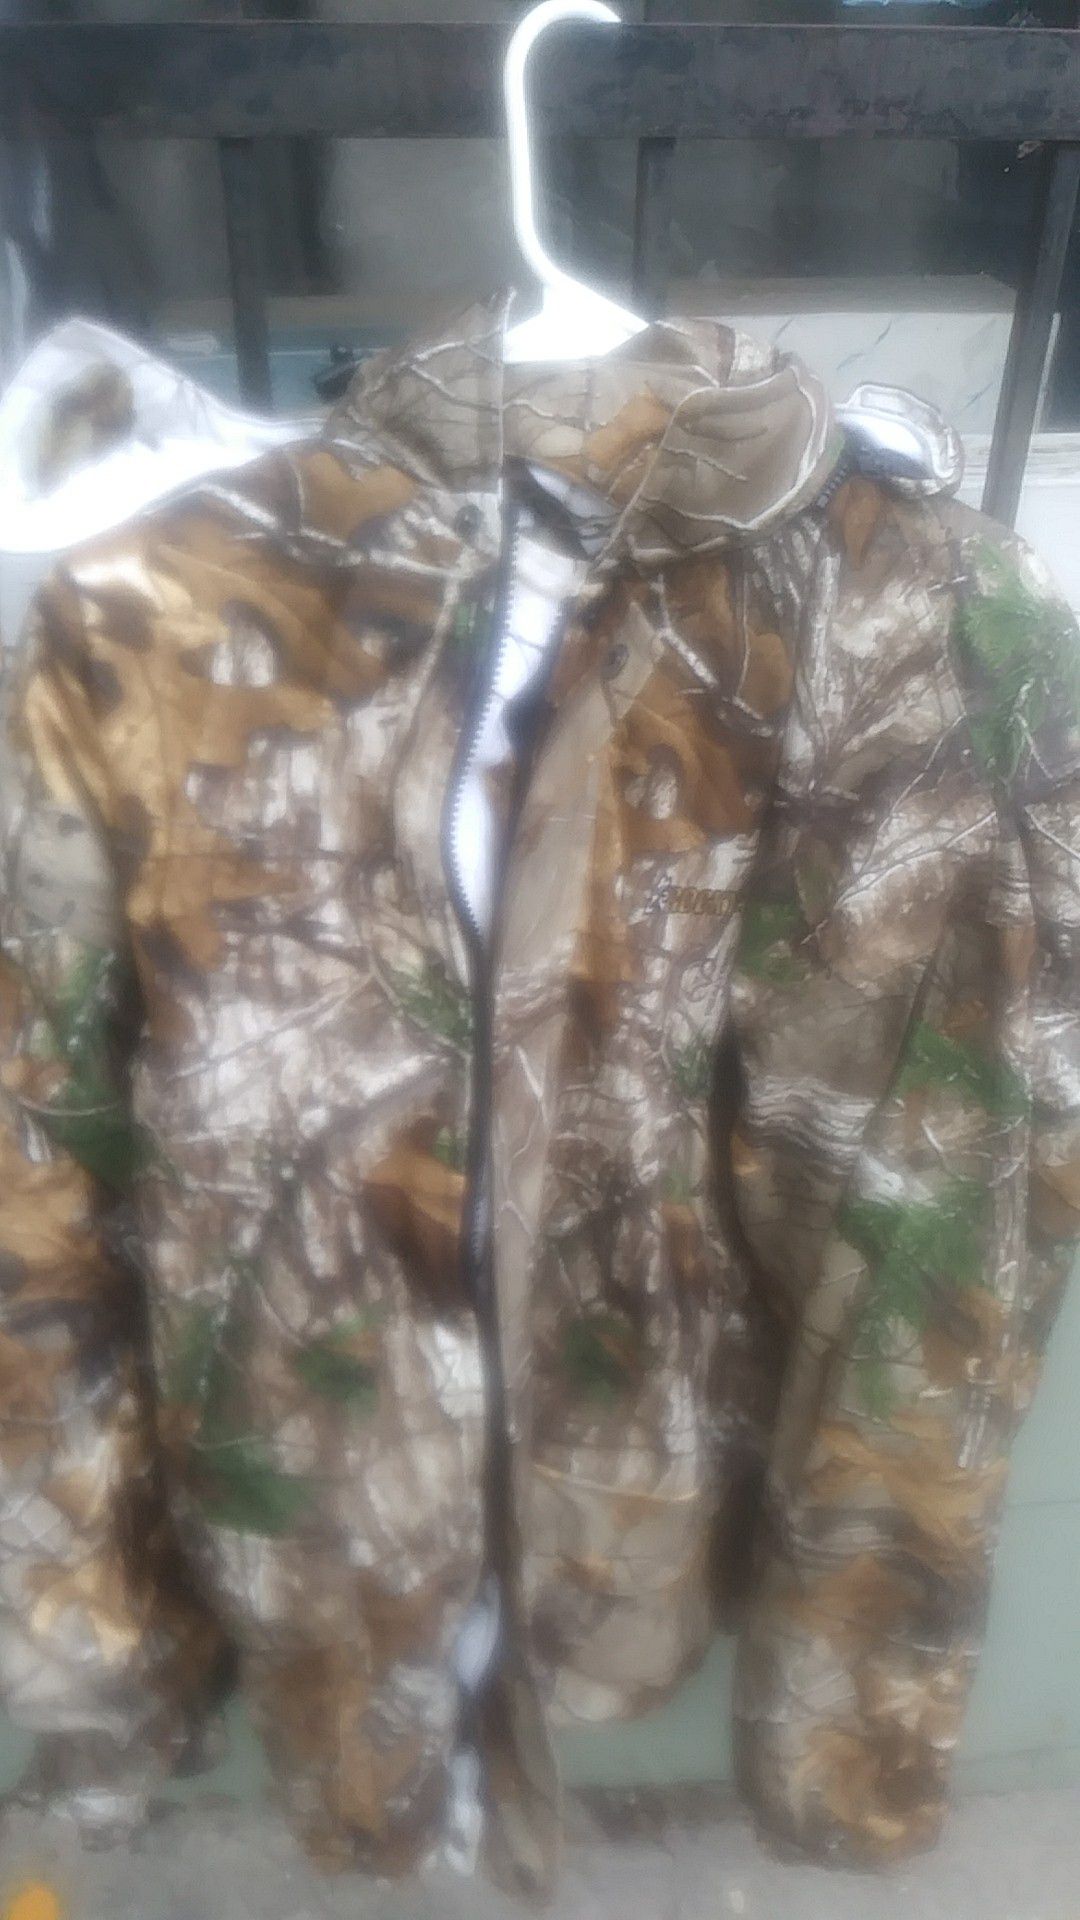 It's a rocky brand Realtree winter hunting jacket brand new and it's reversible